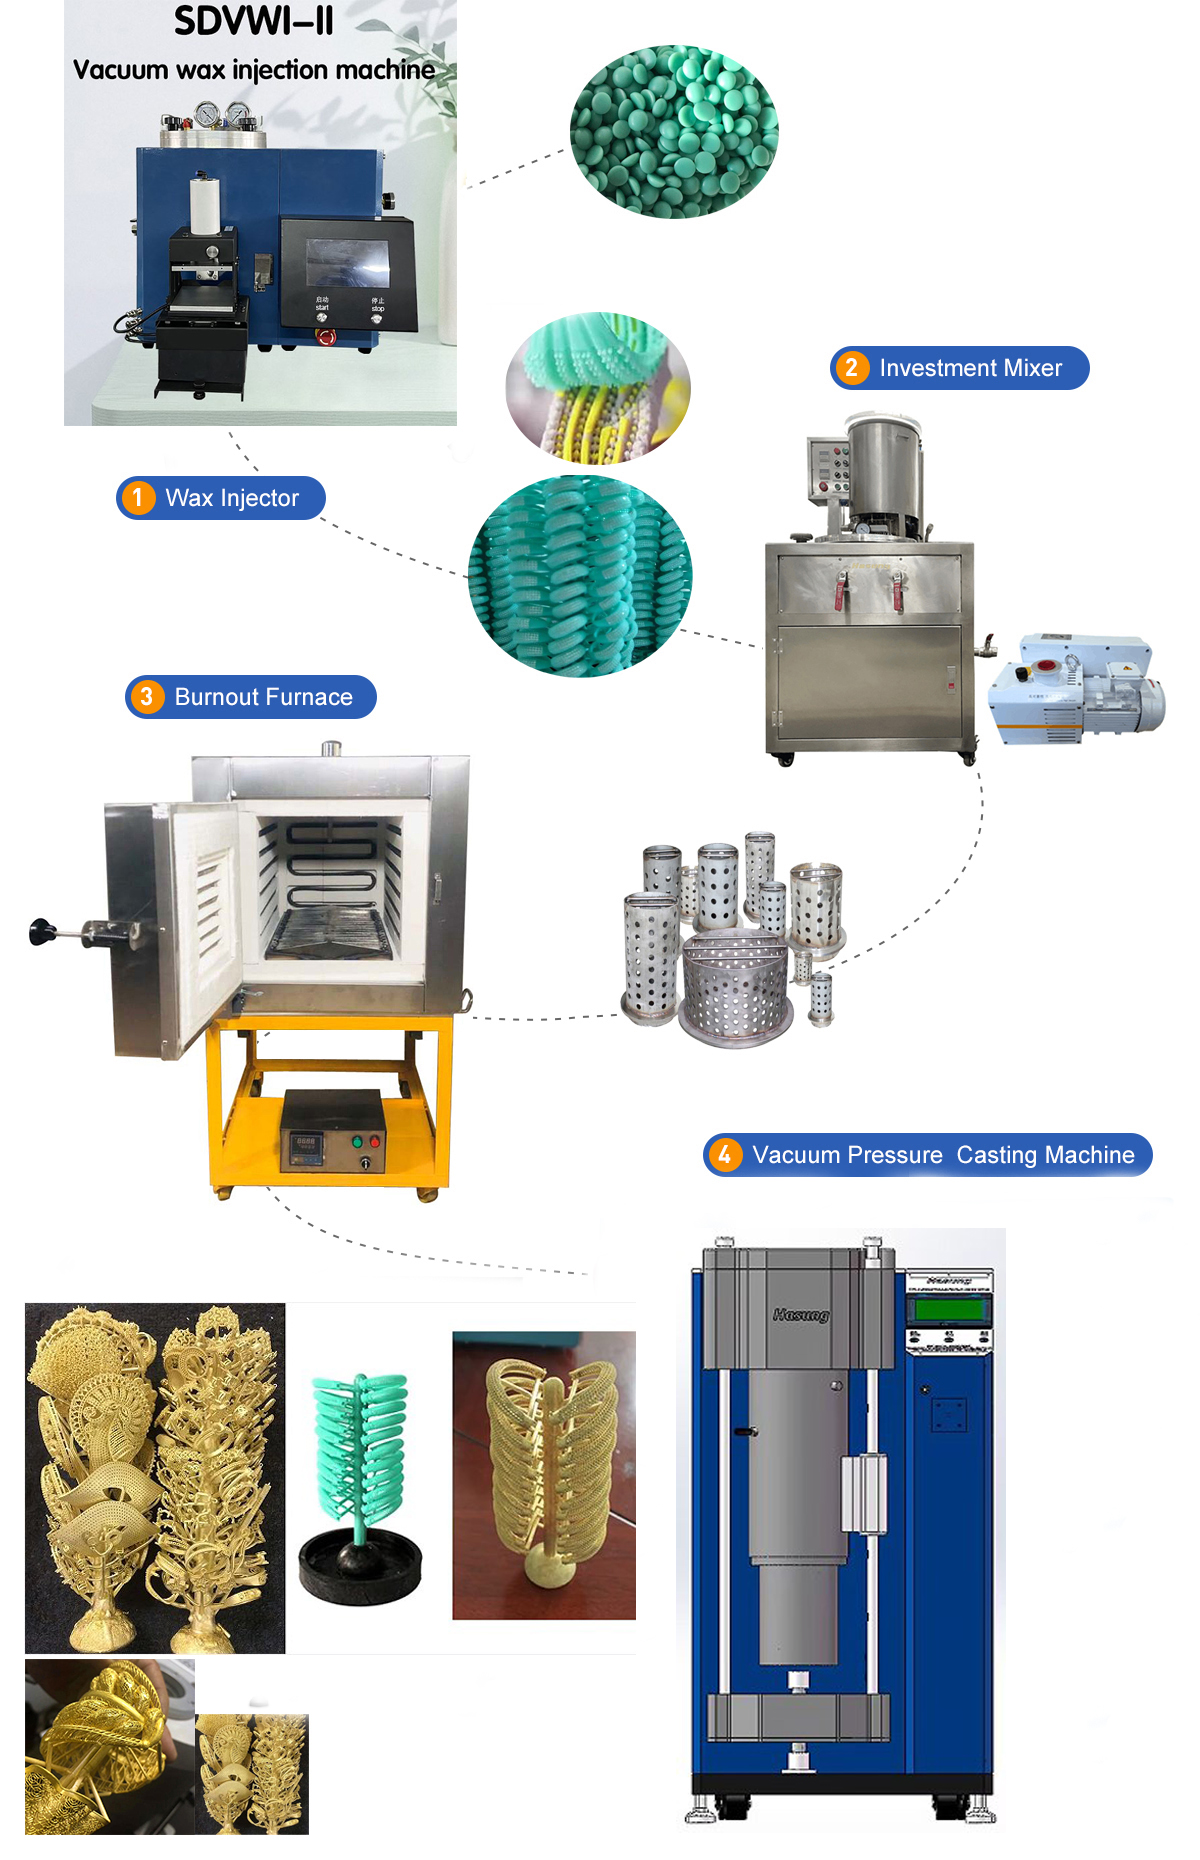 https://www.hasungcasting.com/hasung-vacuum-pressure-casting-machine-technical-advantages-hs-tvc-product/